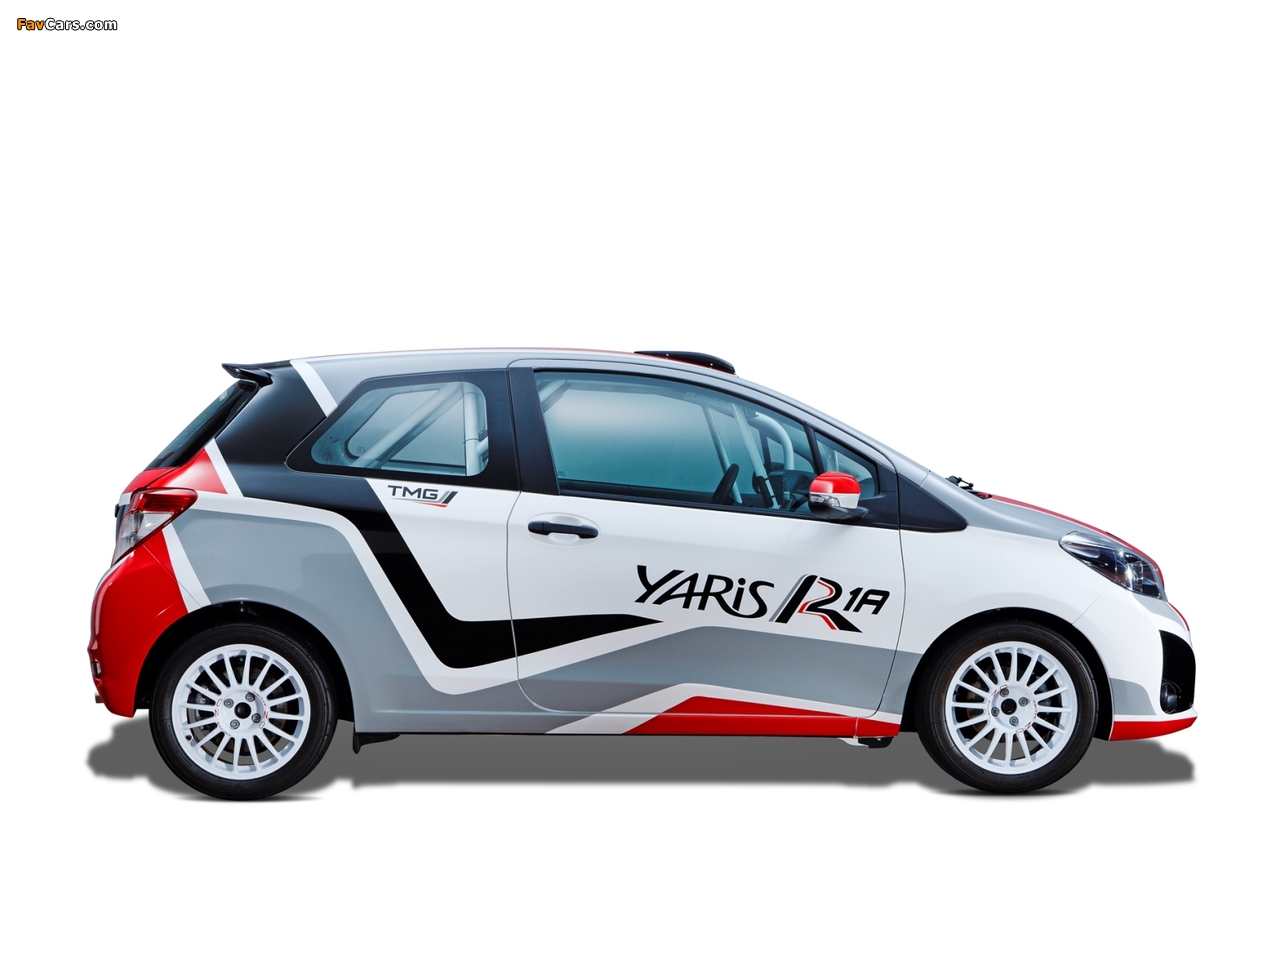 Toyota Yaris R1A Rally Car 2012 pictures (1280 x 960)